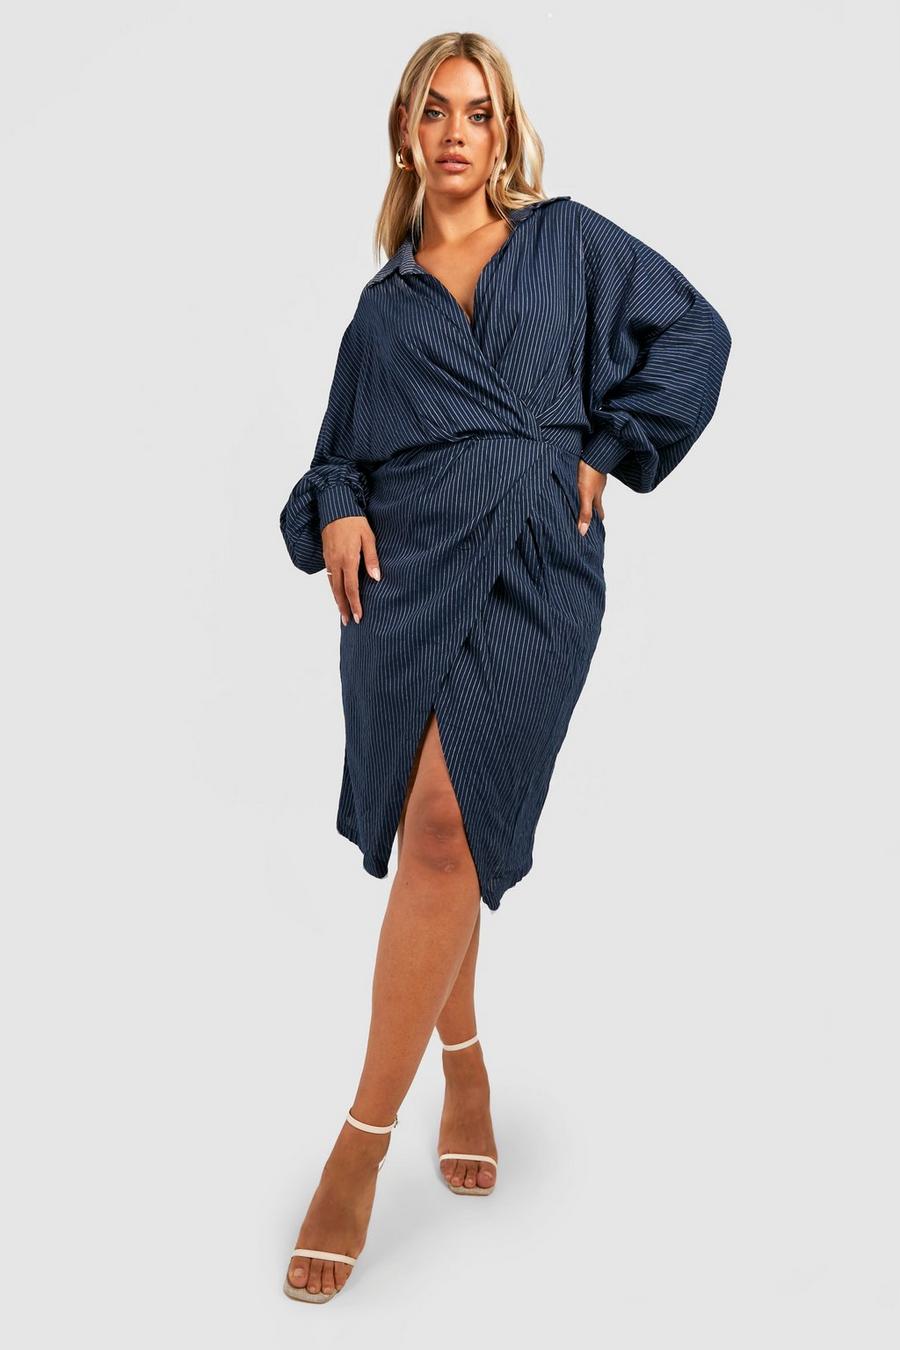 Grande taille - Robe chemise mi-longue à rayures, Navy